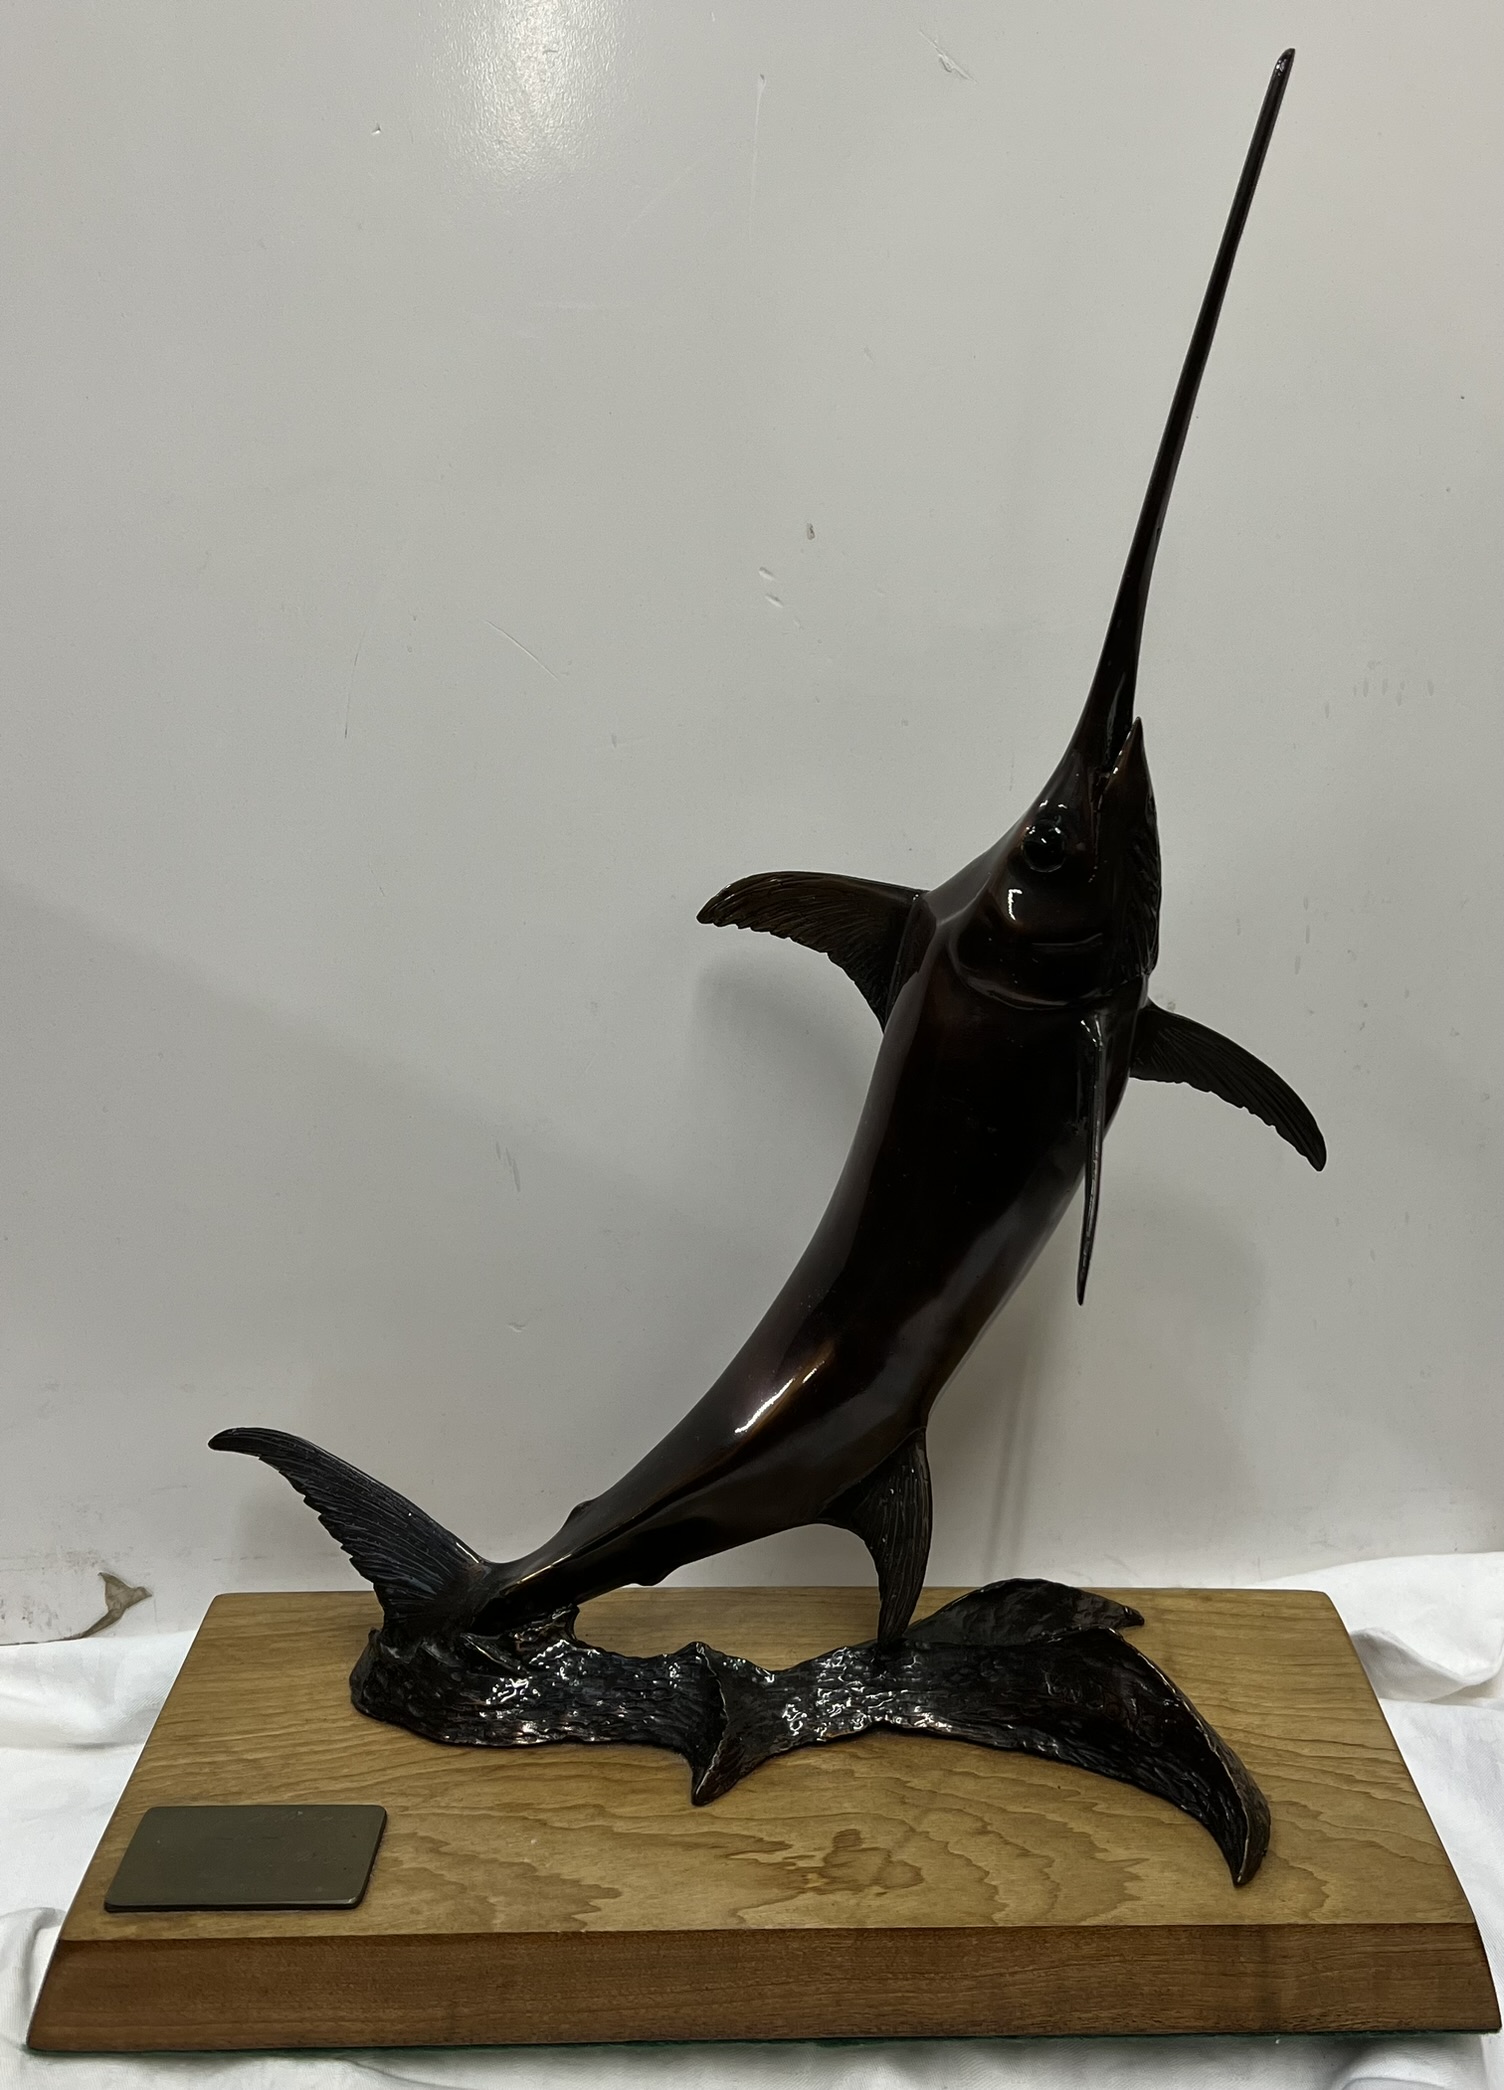 Len Jones (South African) A Bronze Marlin Mounted on a wooden base Signed Bears a plaque "Danny